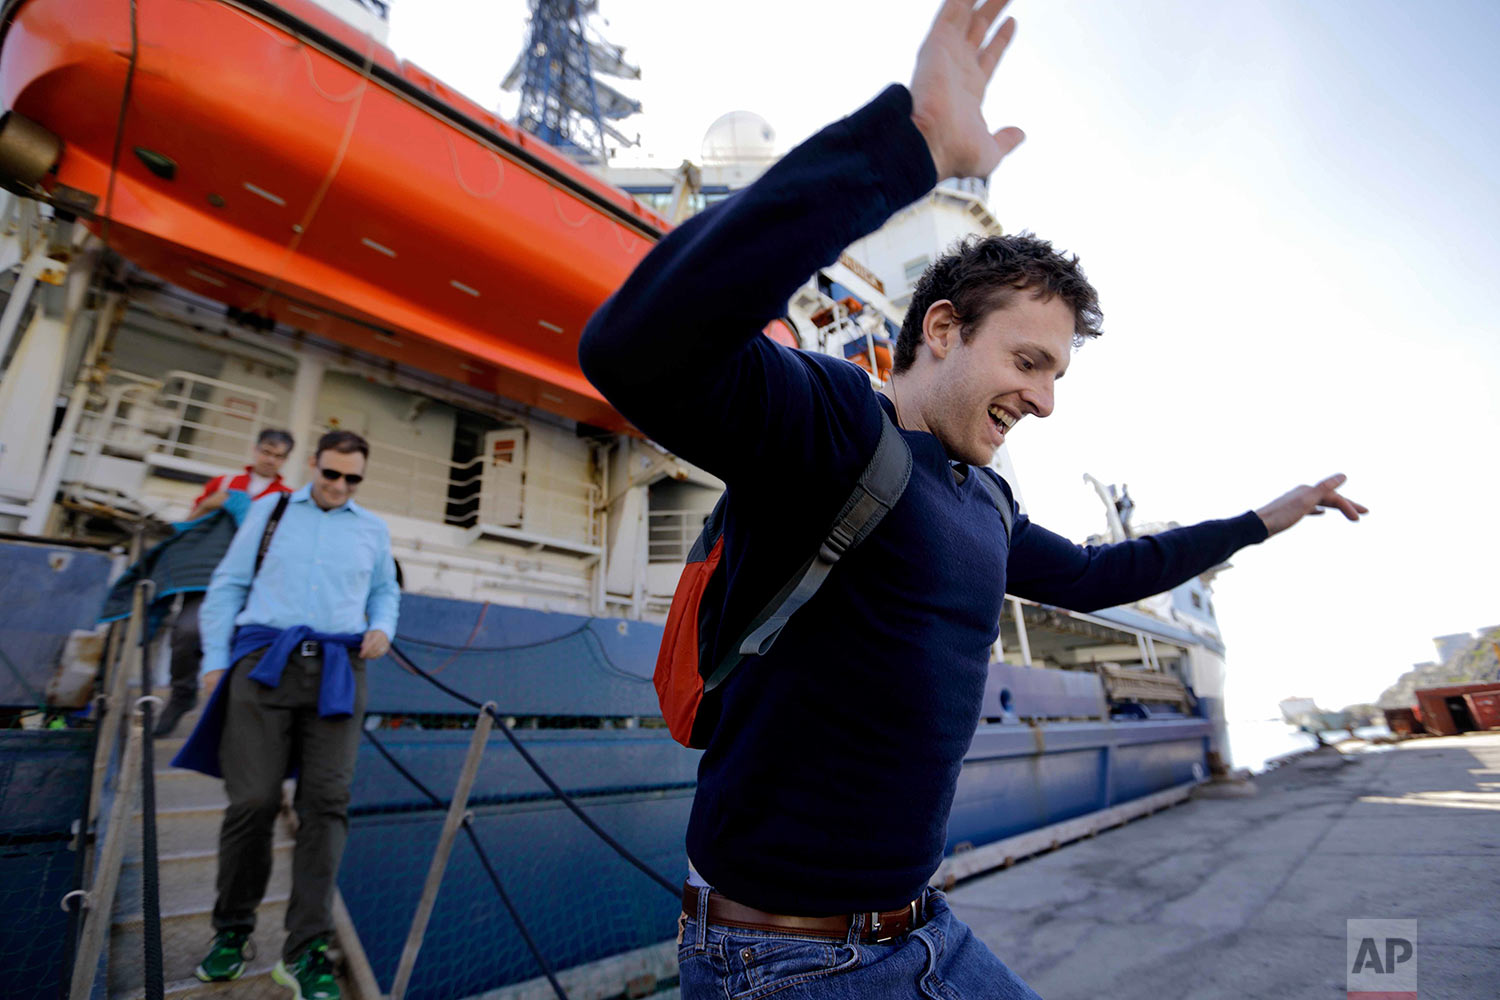  Researcher Scott Joblin jumps onto land for the first time since setting sail aboard the Finnish icebreaker MSV Nordica as it arrives into Nuuk, Greenland, after traversing the Northwest Passage through the Canadian Arctic Archipelago, Saturday, Jul